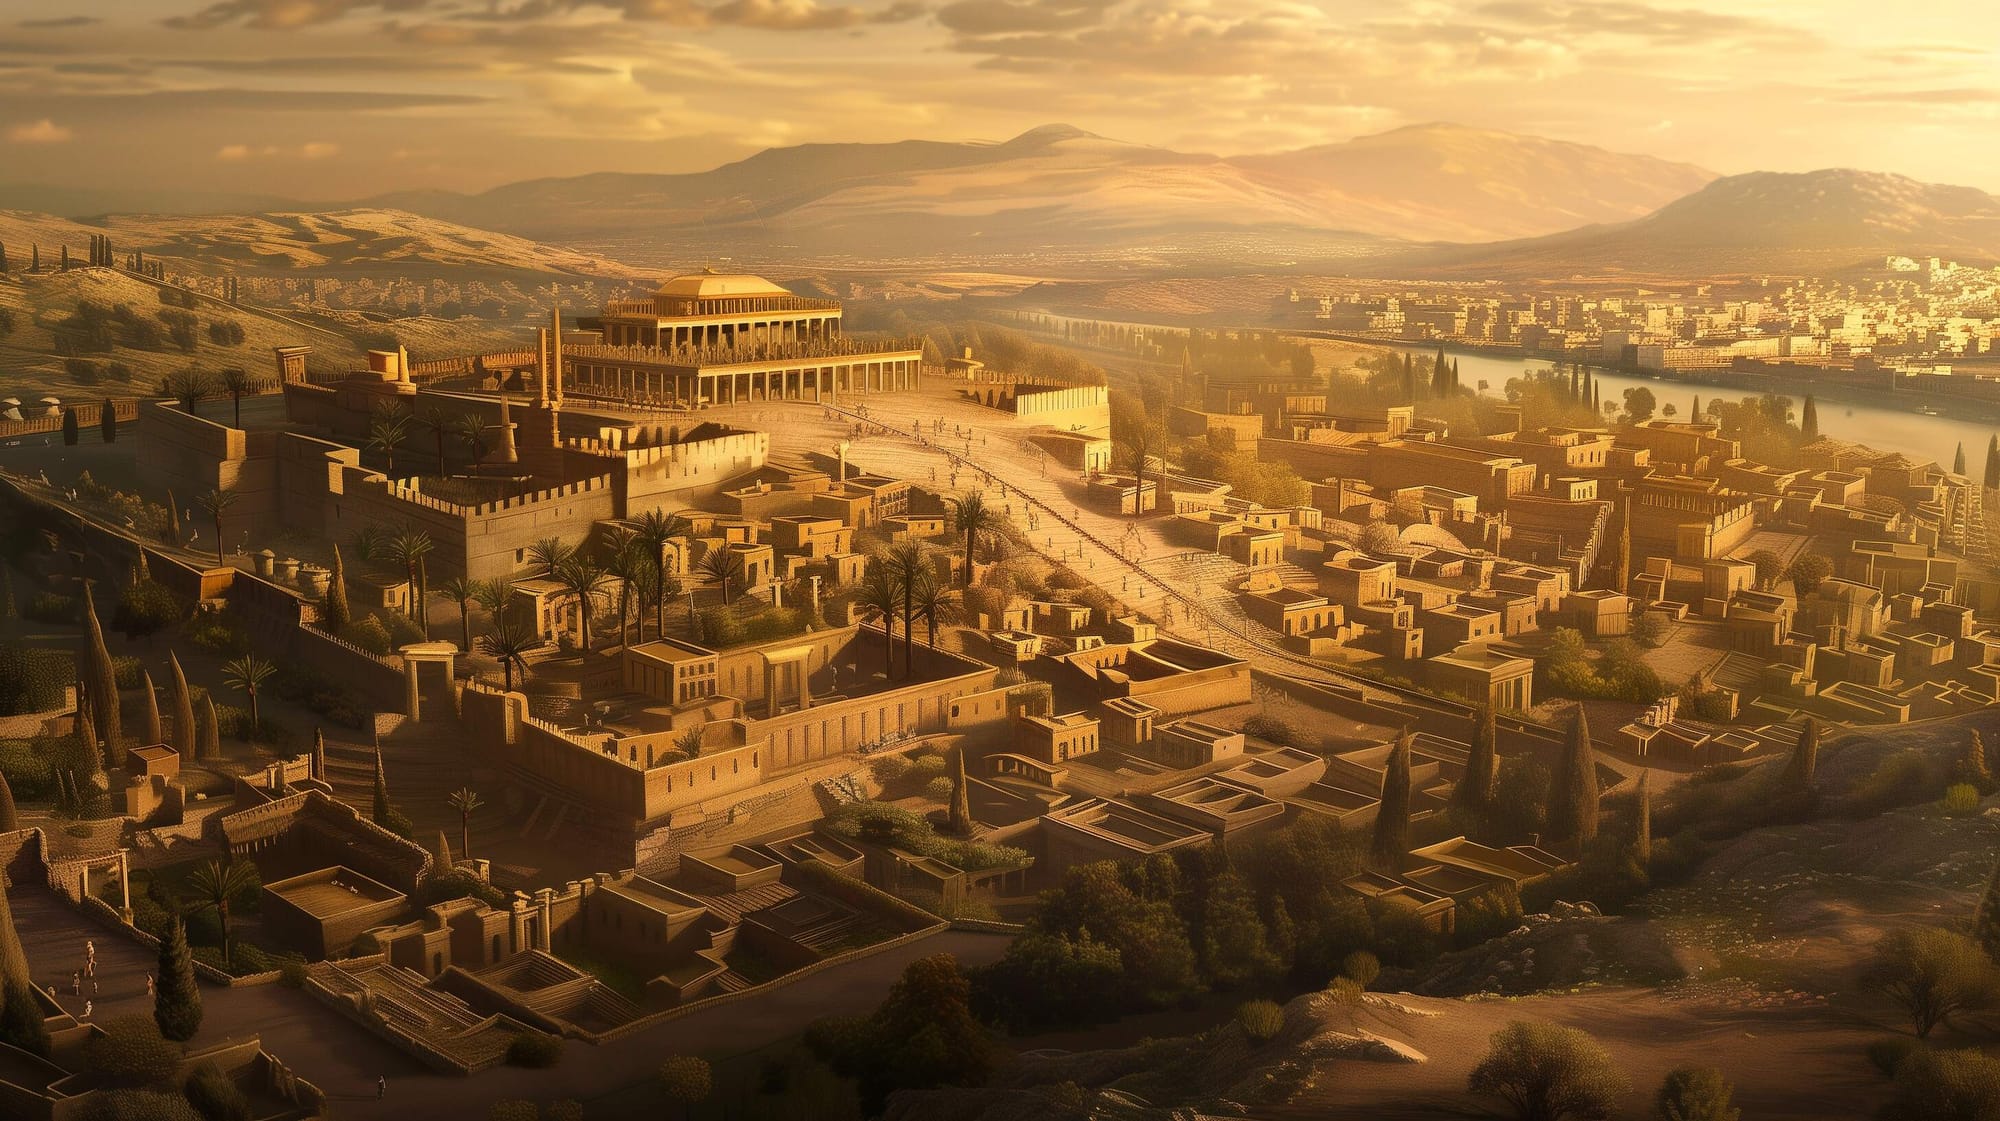 A possible representation of Antioch, re Ancient Greek city that housed more than 600,000 people in its prime